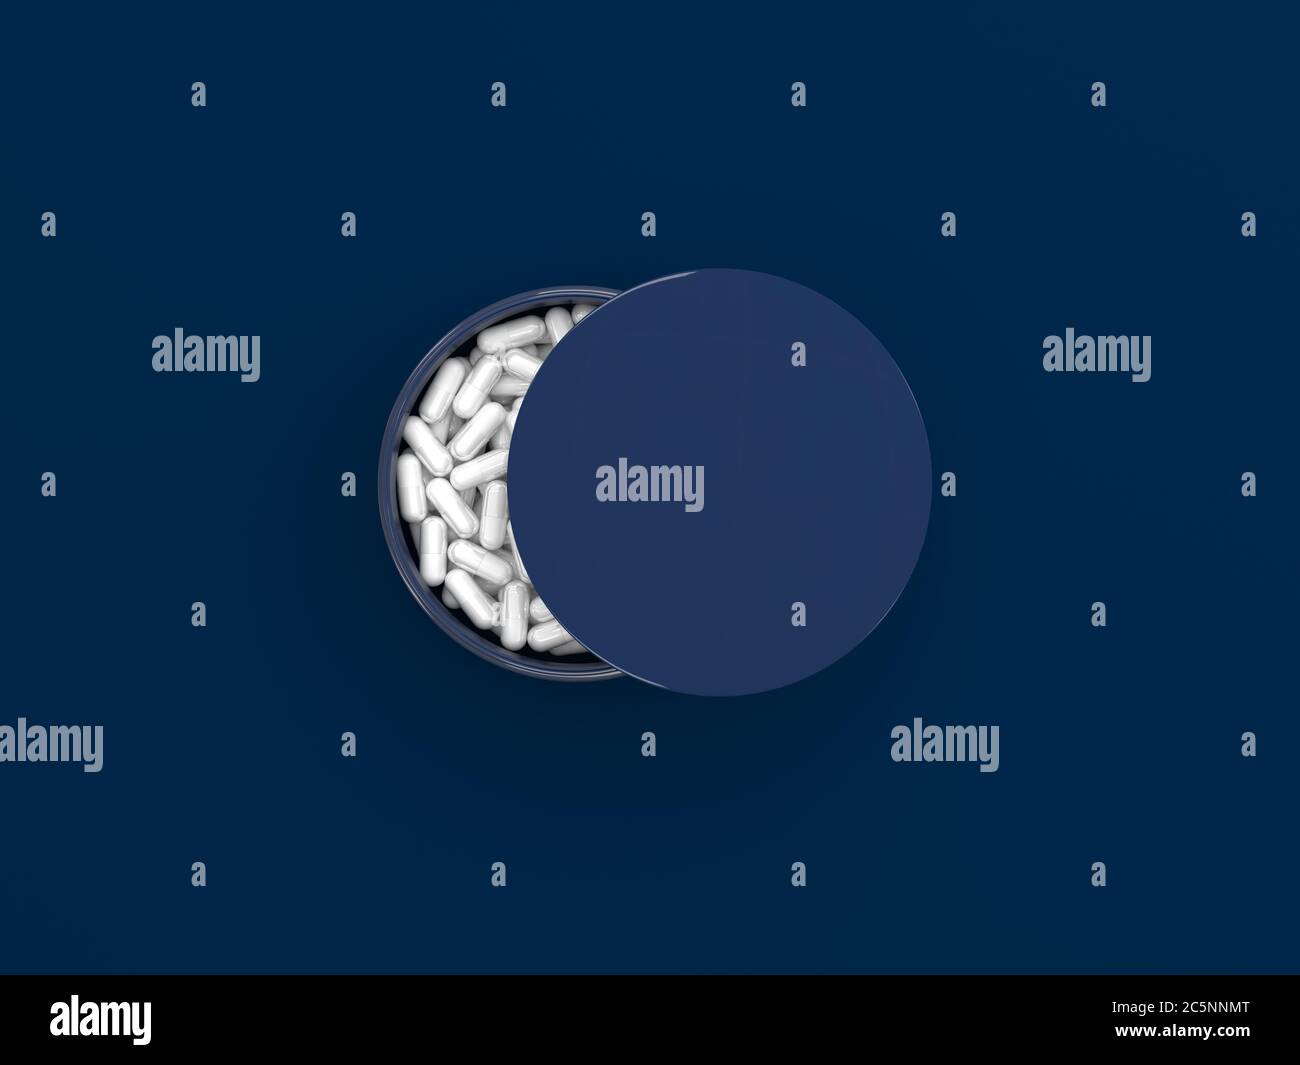 Packing sleeping pills on a dark blue background. An ajar can with a sleeping pill forming a half moon shape in a top view. Remedy for insomnia. Creat Stock Photo